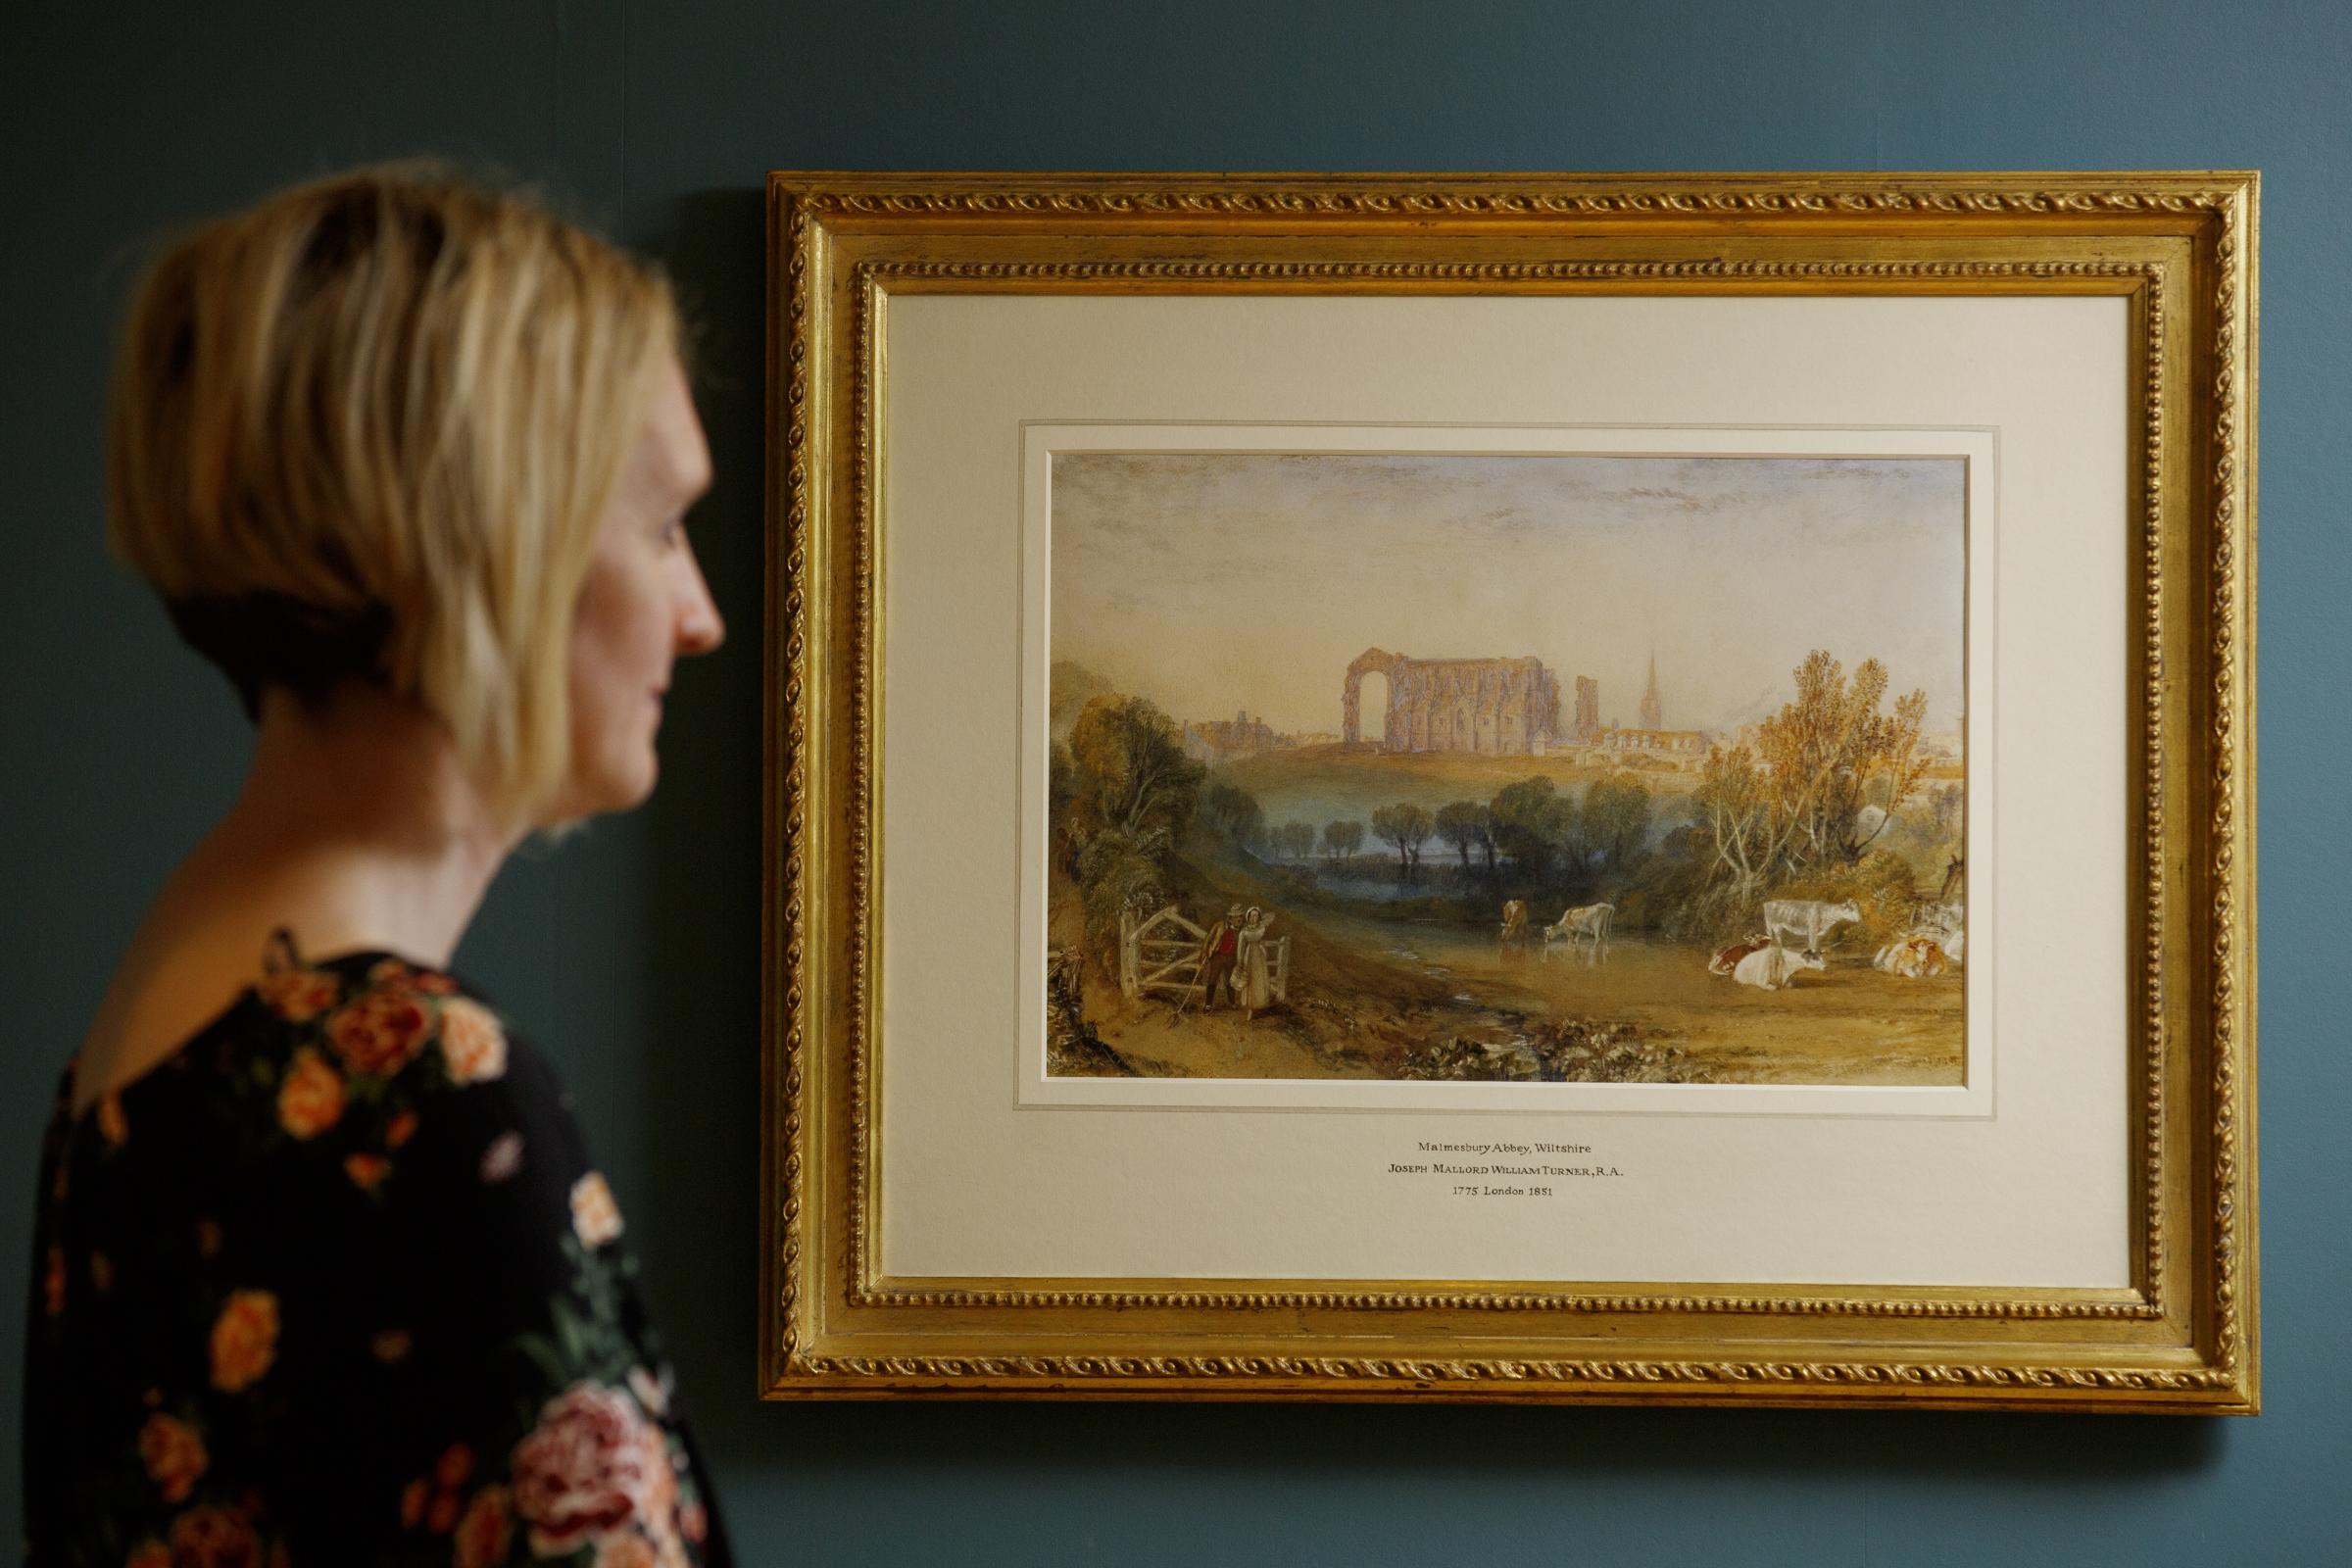 The Mayor’s secretary, Lynda Cryer, views the painting of “Malmesbury Abbey, Wiltshire” by British artist J.M.W. Turner on public display, for the first time in 200 years, at the Athelstan Museum and Gallery Photo by Luke MacGregor